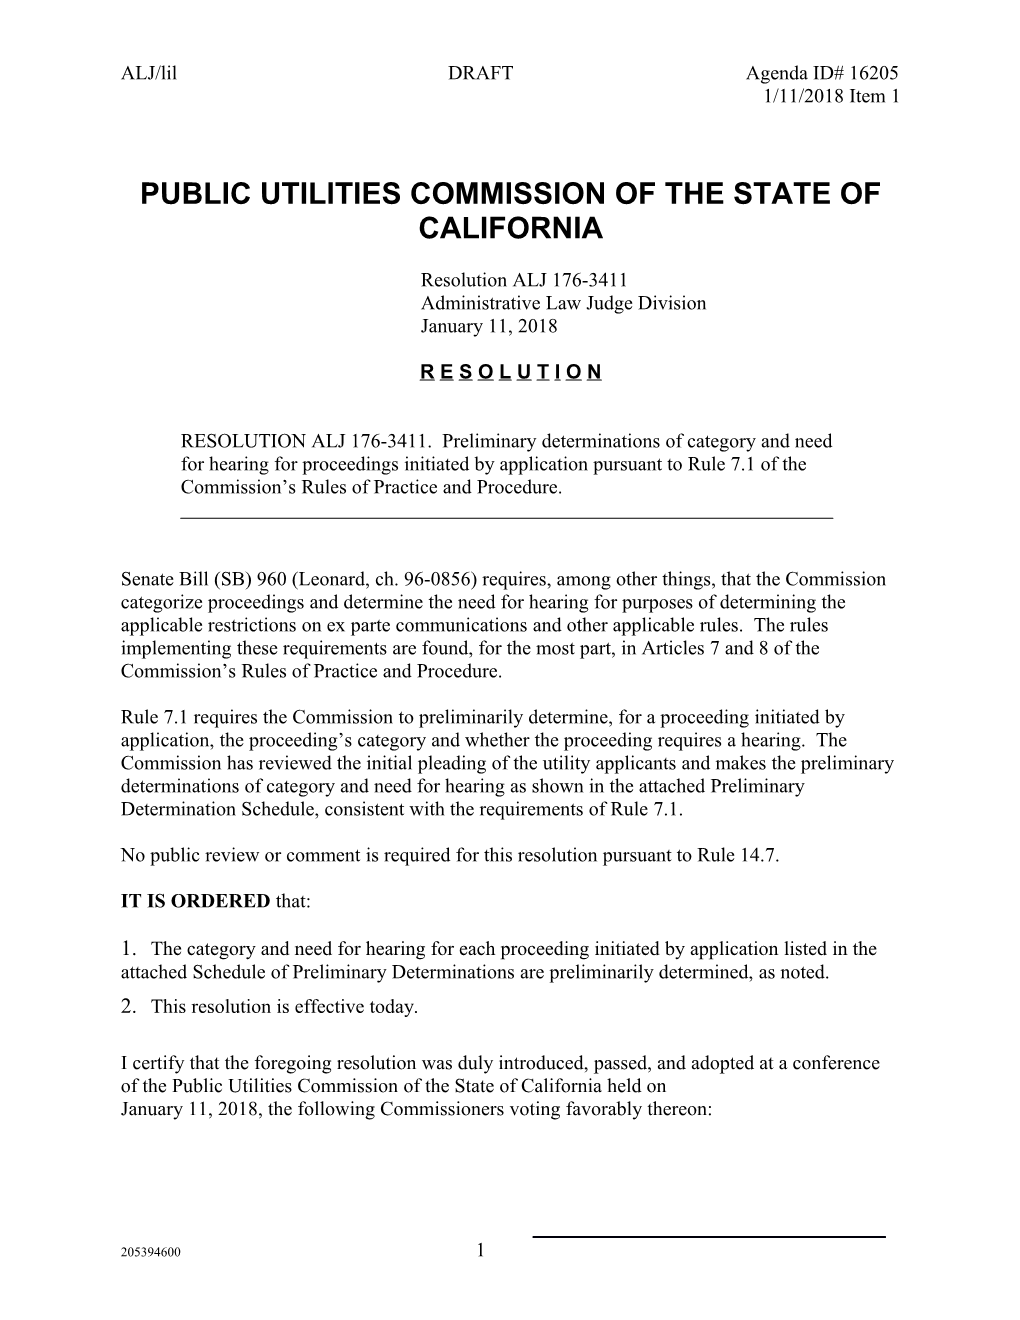 Public Utilities Commission of the State of California s72